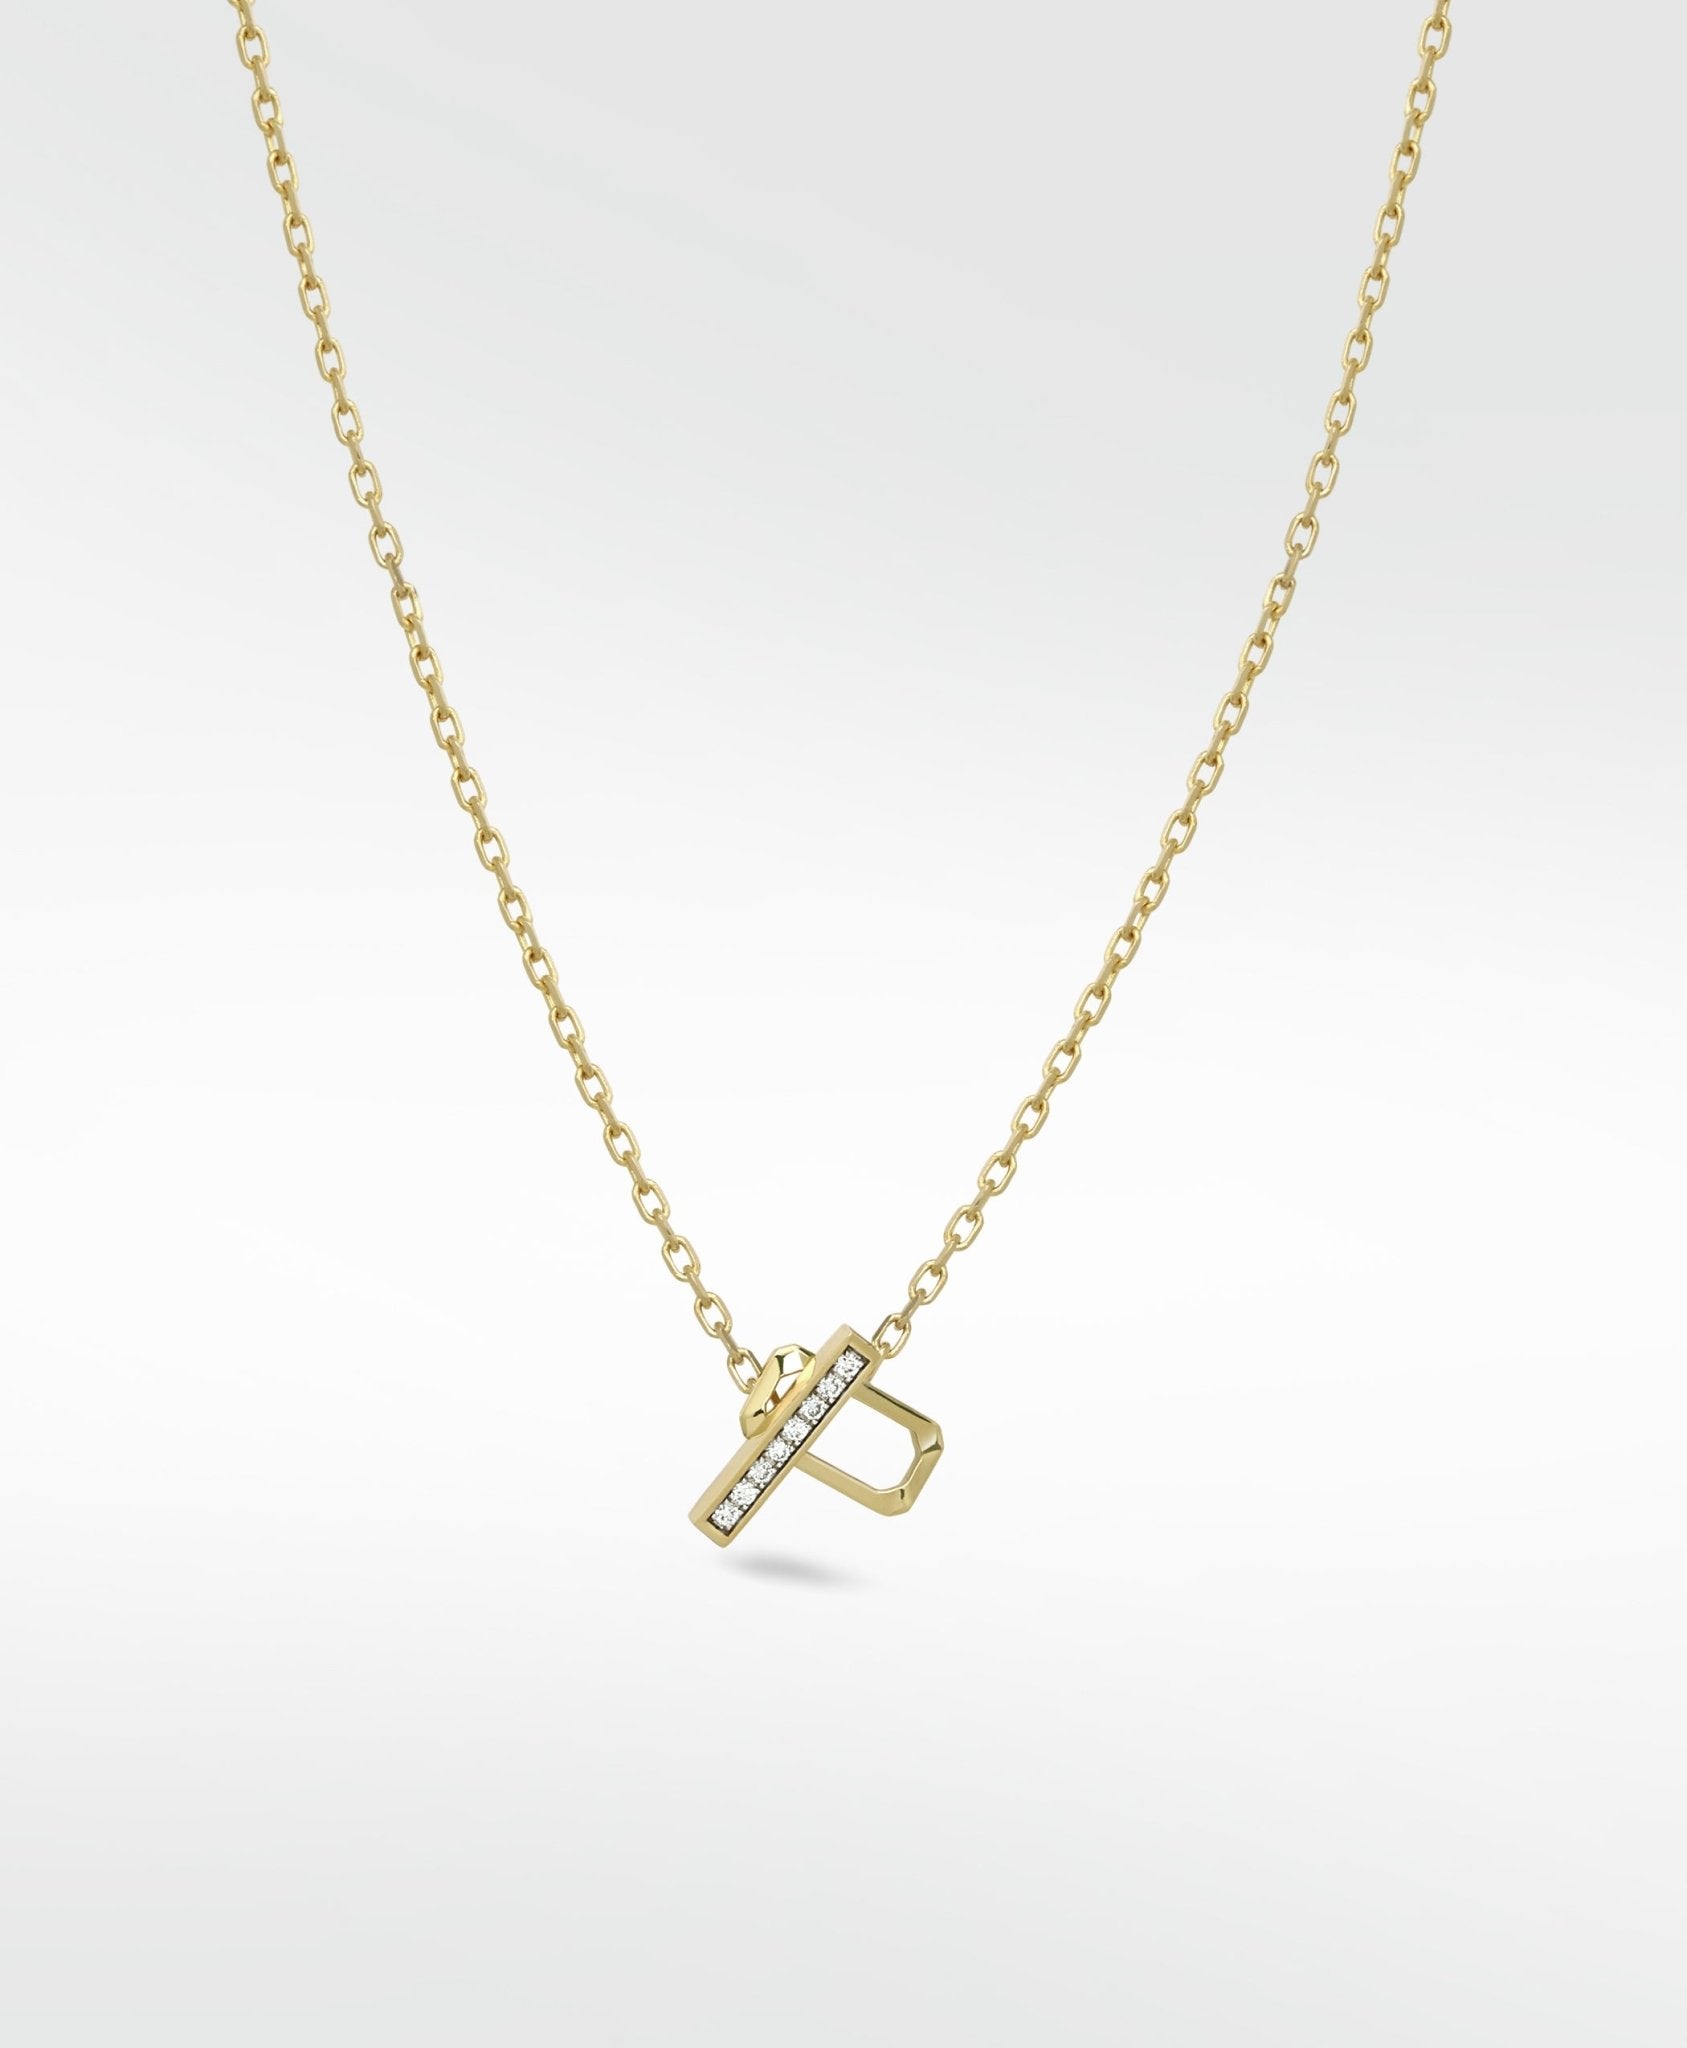 Eclipsis Toggle Necklace with Diamonds in 18k Yellow Gold - Lark and Berry